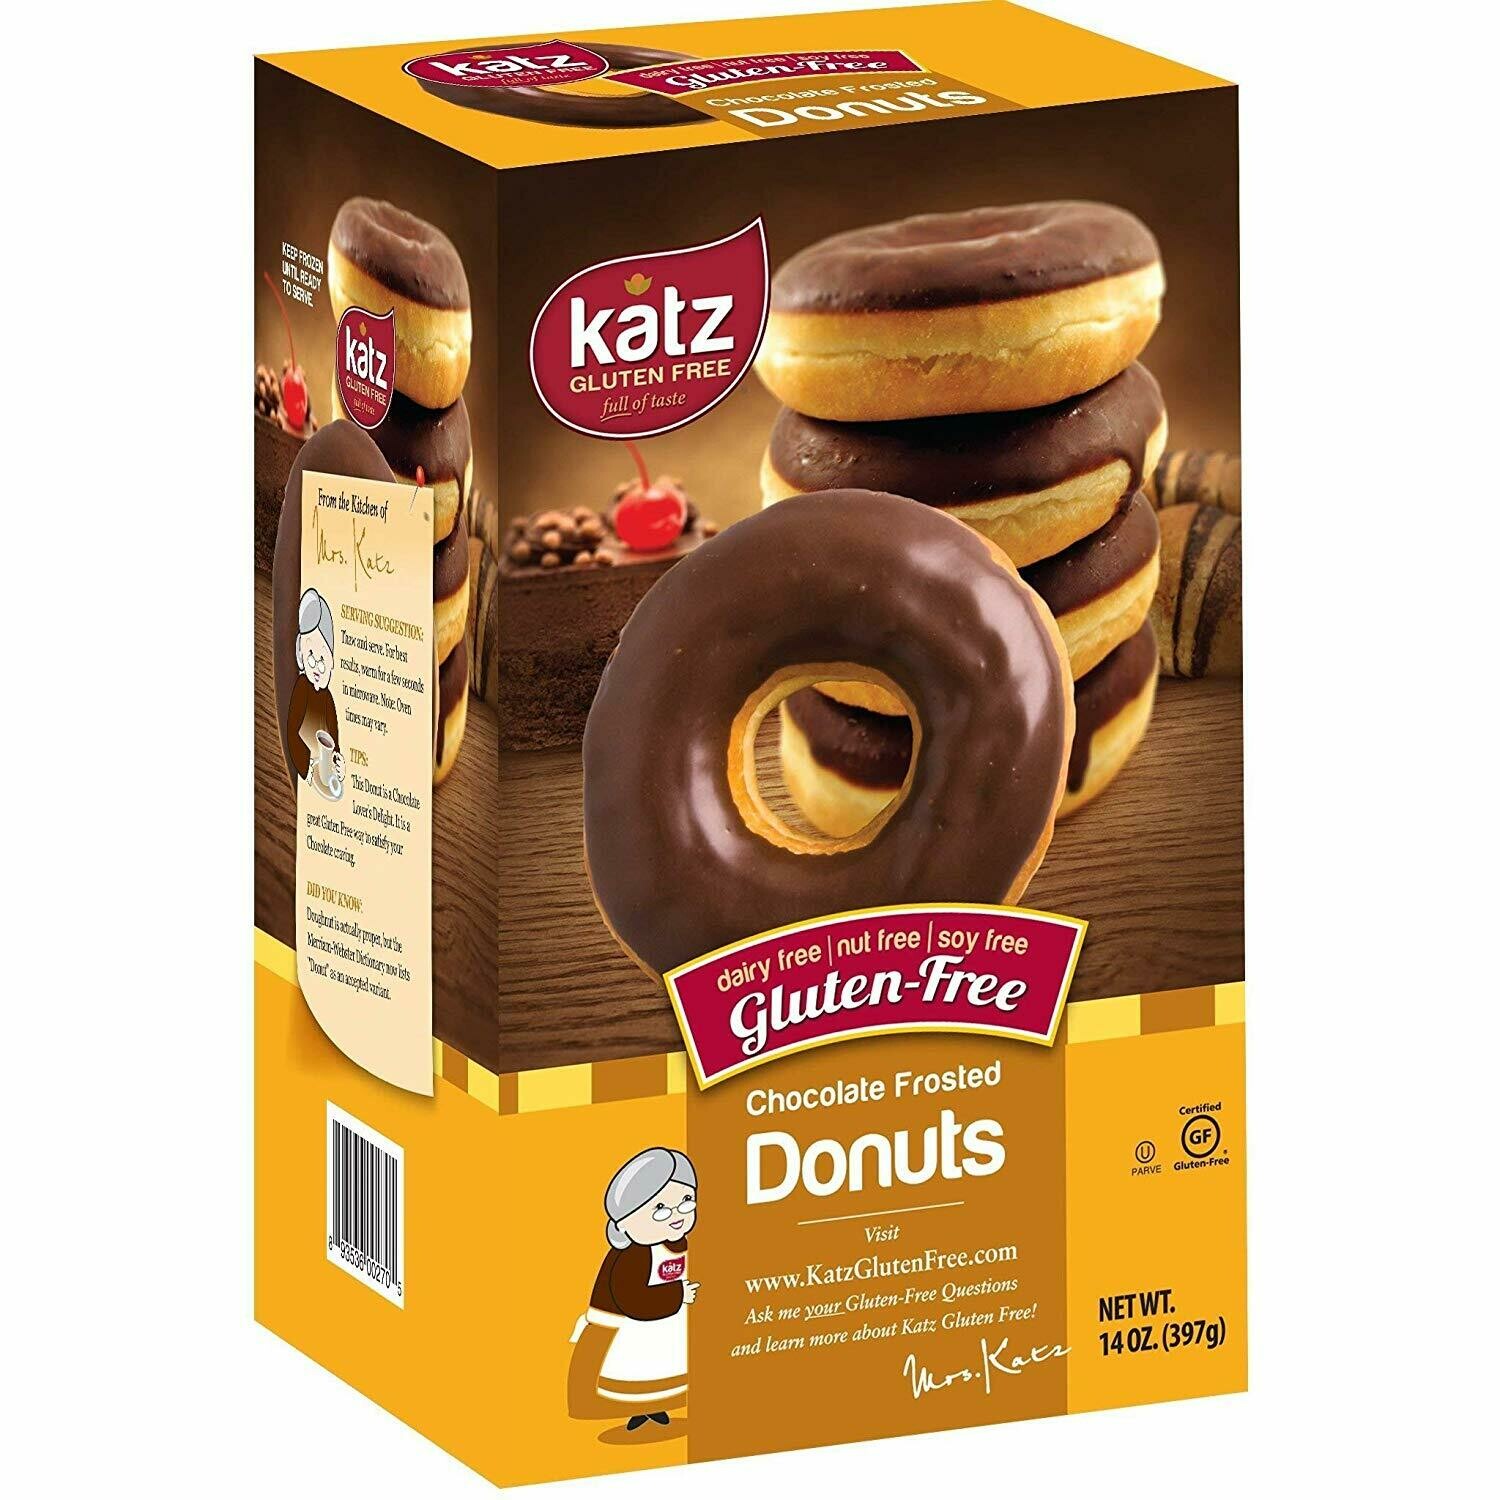 Katz Donuts Chocolate Frosted 6/14oz - Case of 6 packs